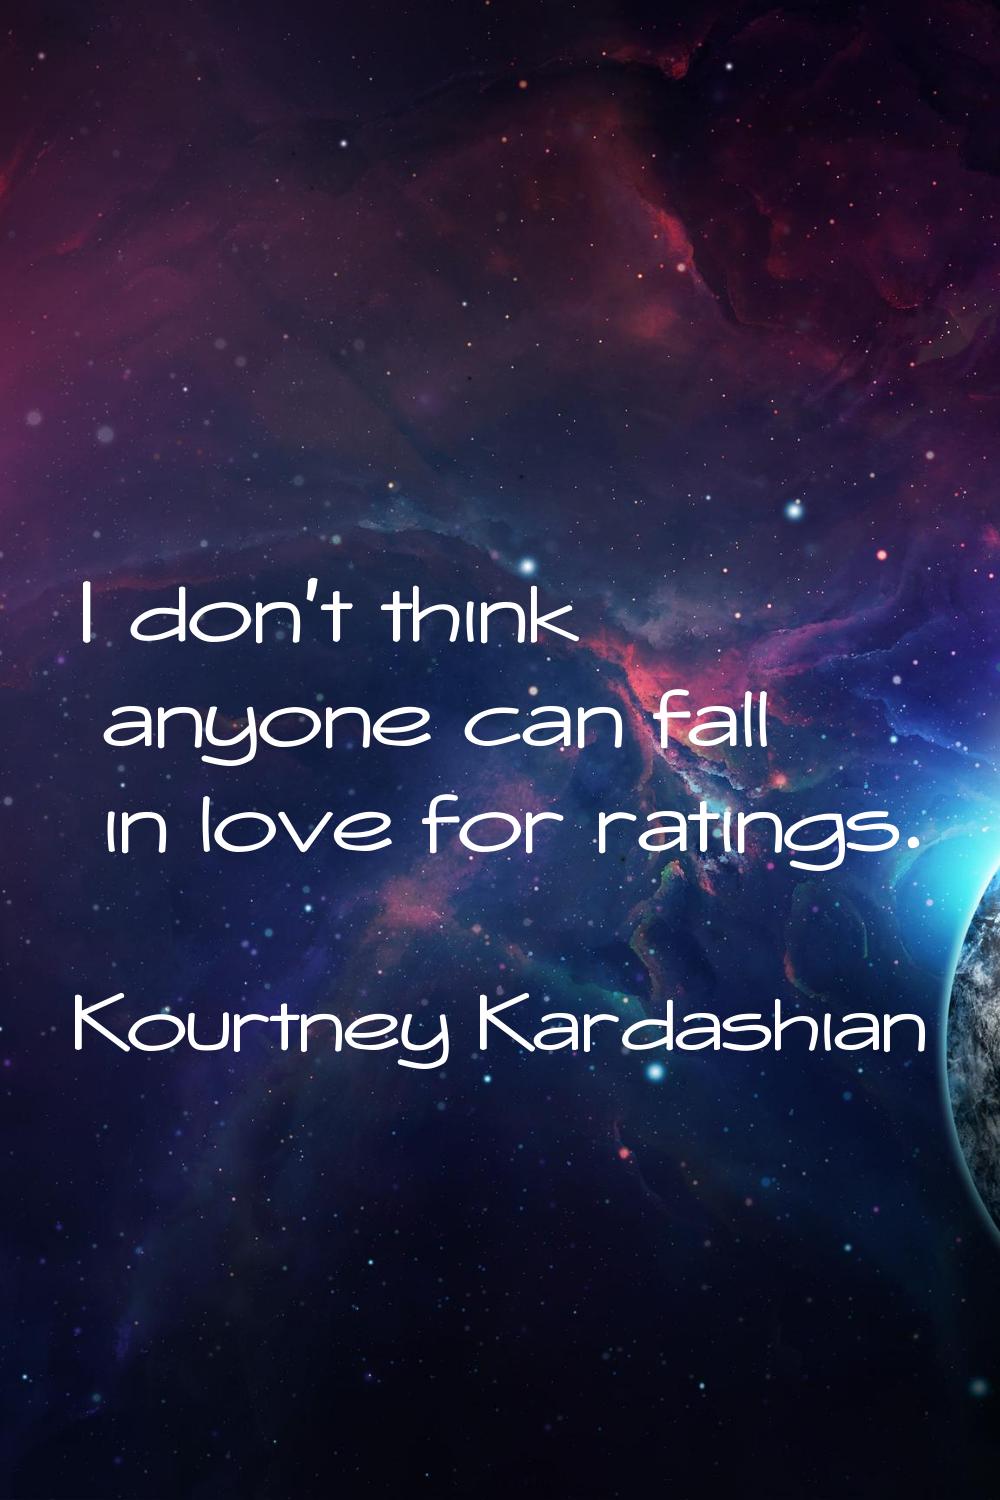 I don't think anyone can fall in love for ratings.